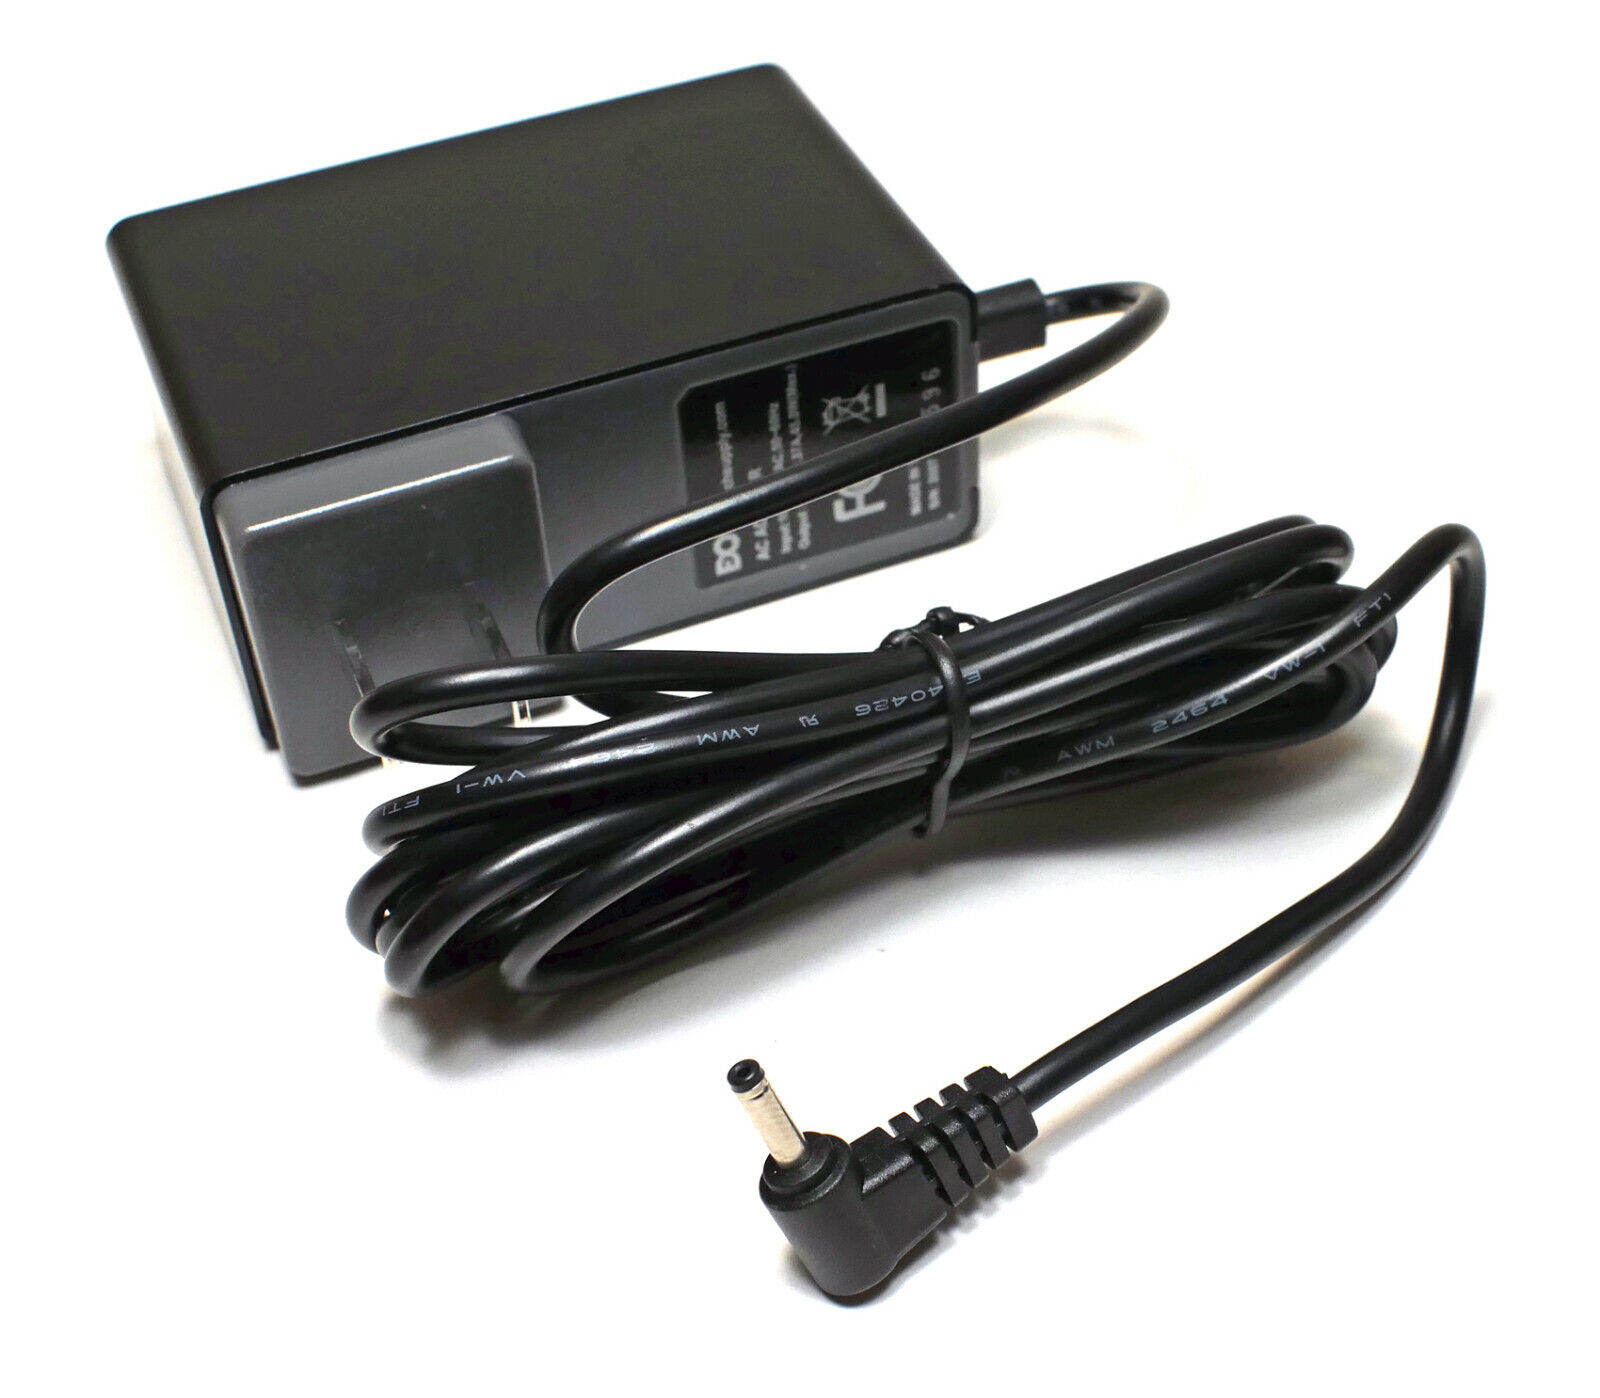 AC Wall Charger for Acer Aspire S7 S7-392 S7-191 S7-391 S7-393 Ultrabook Laptop